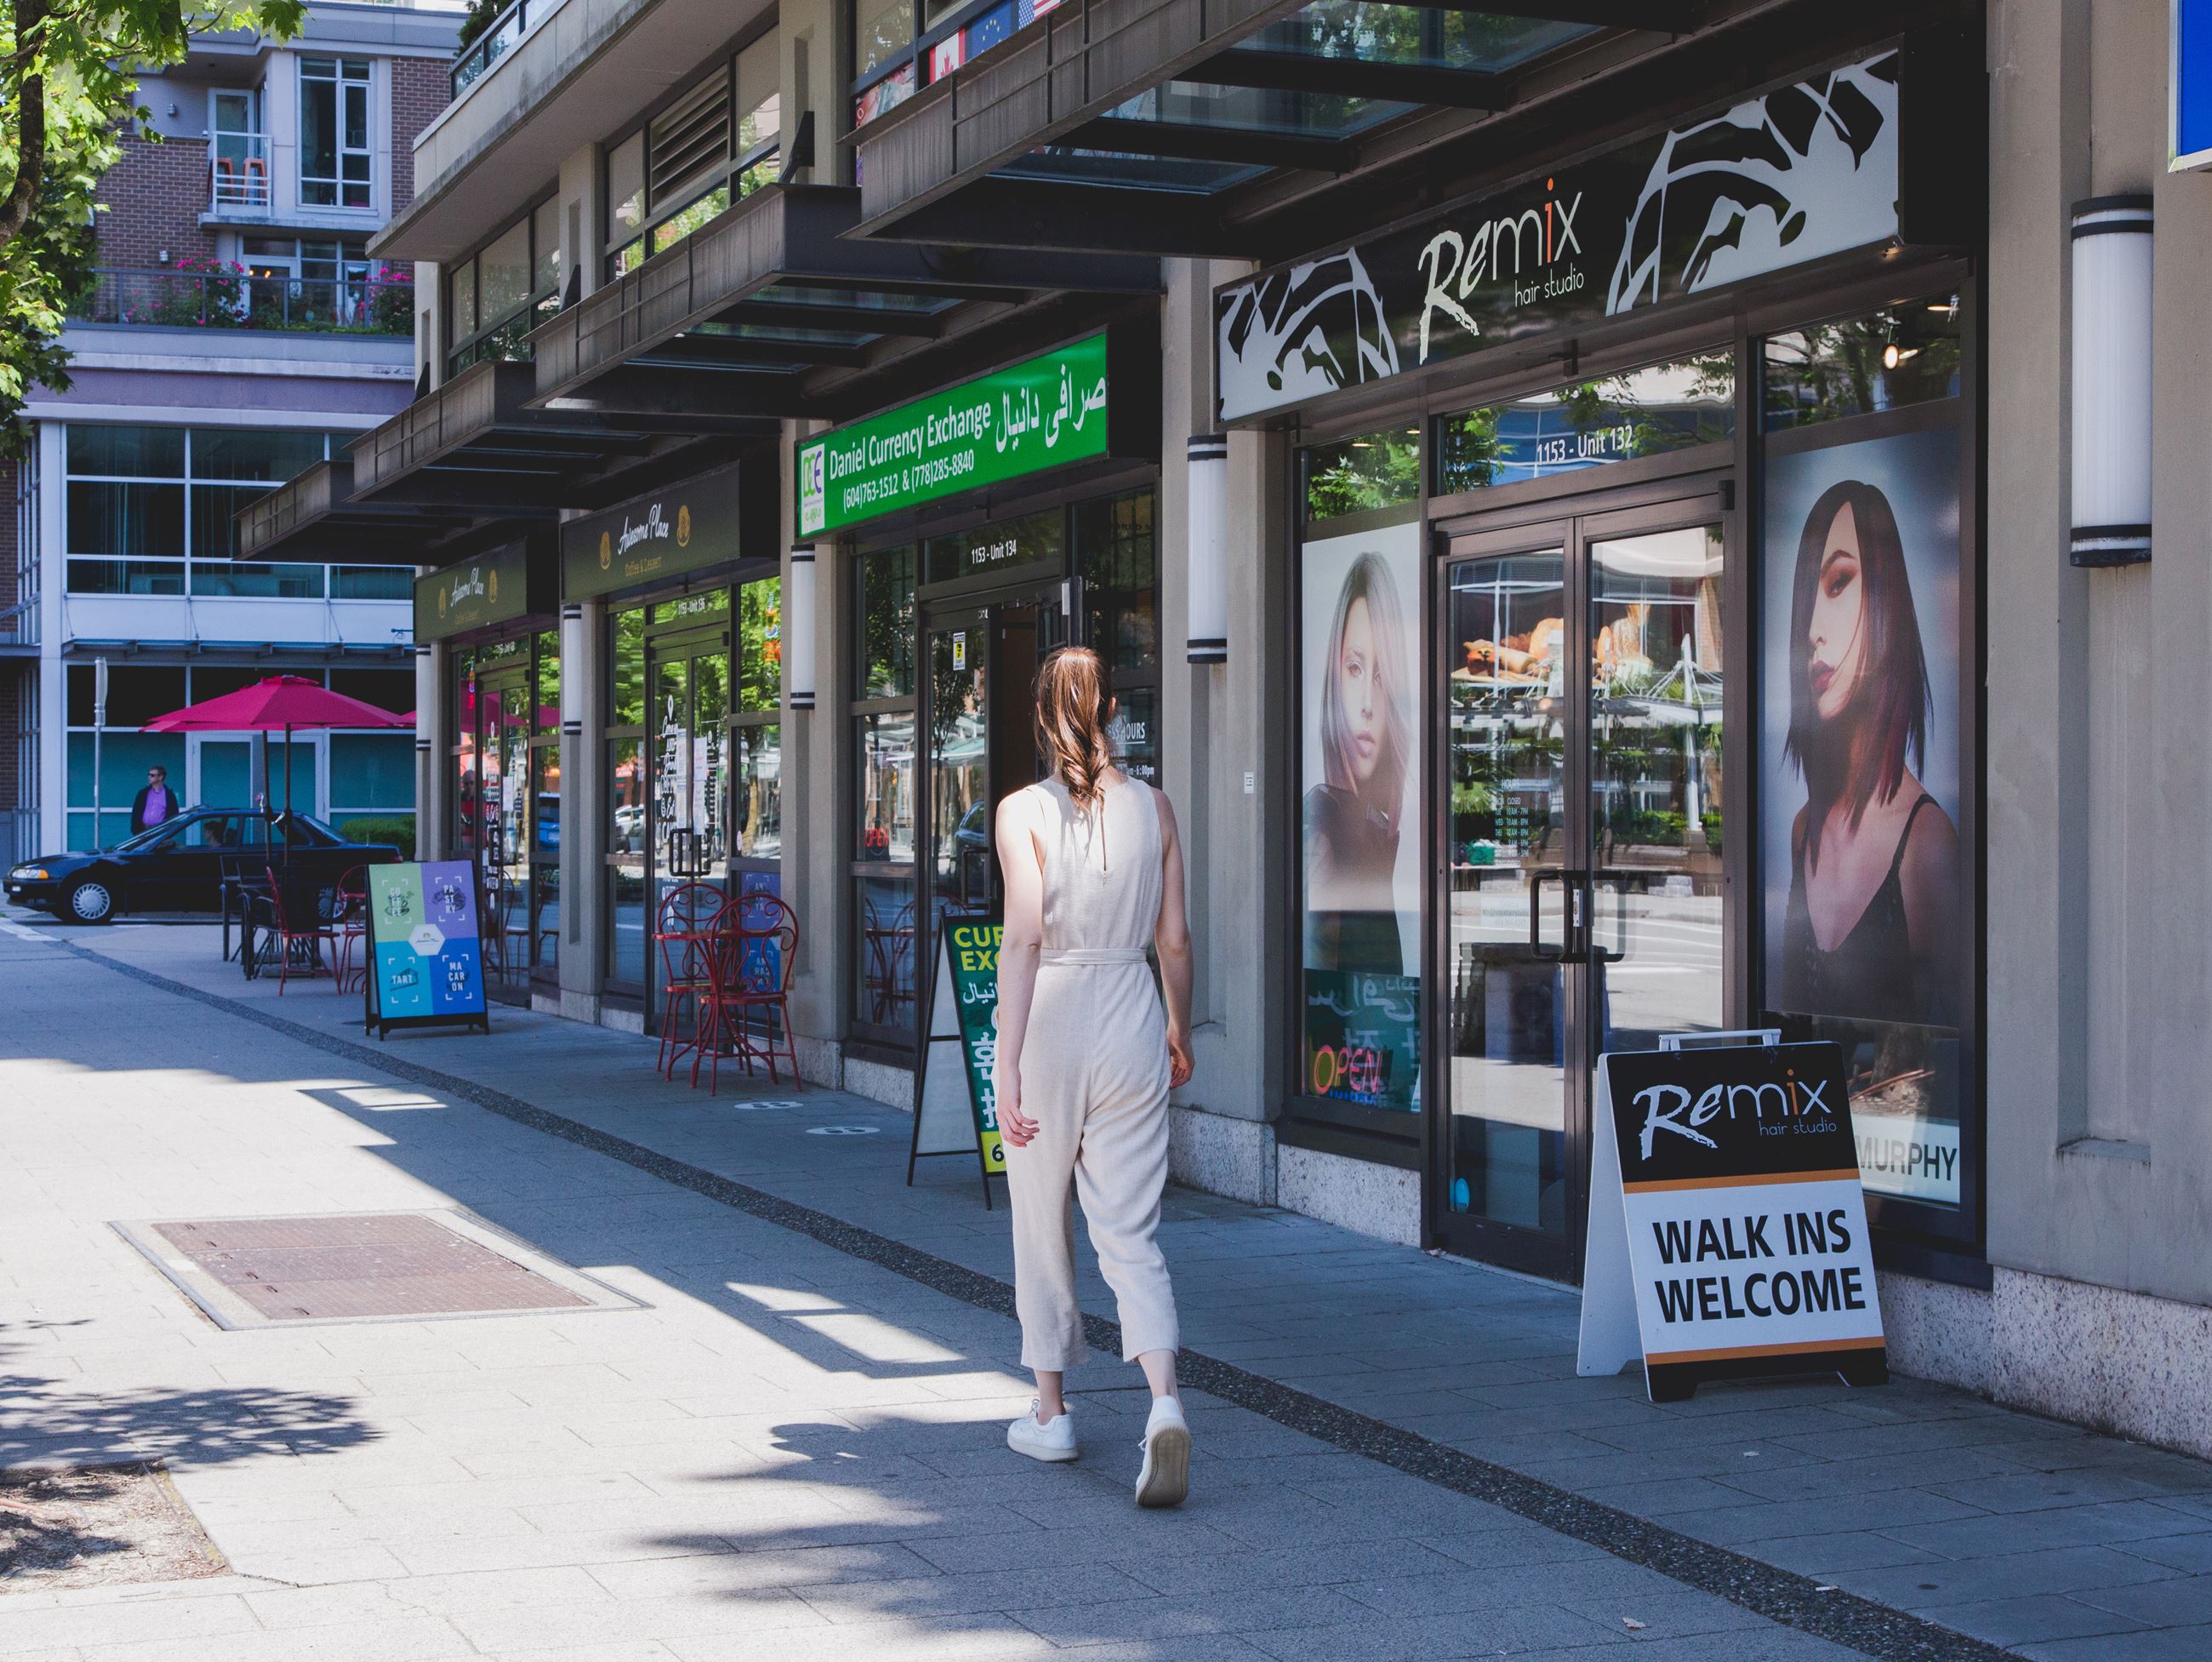 A young woman walks on the sidewalk in City Centre in front of a number of local businesses